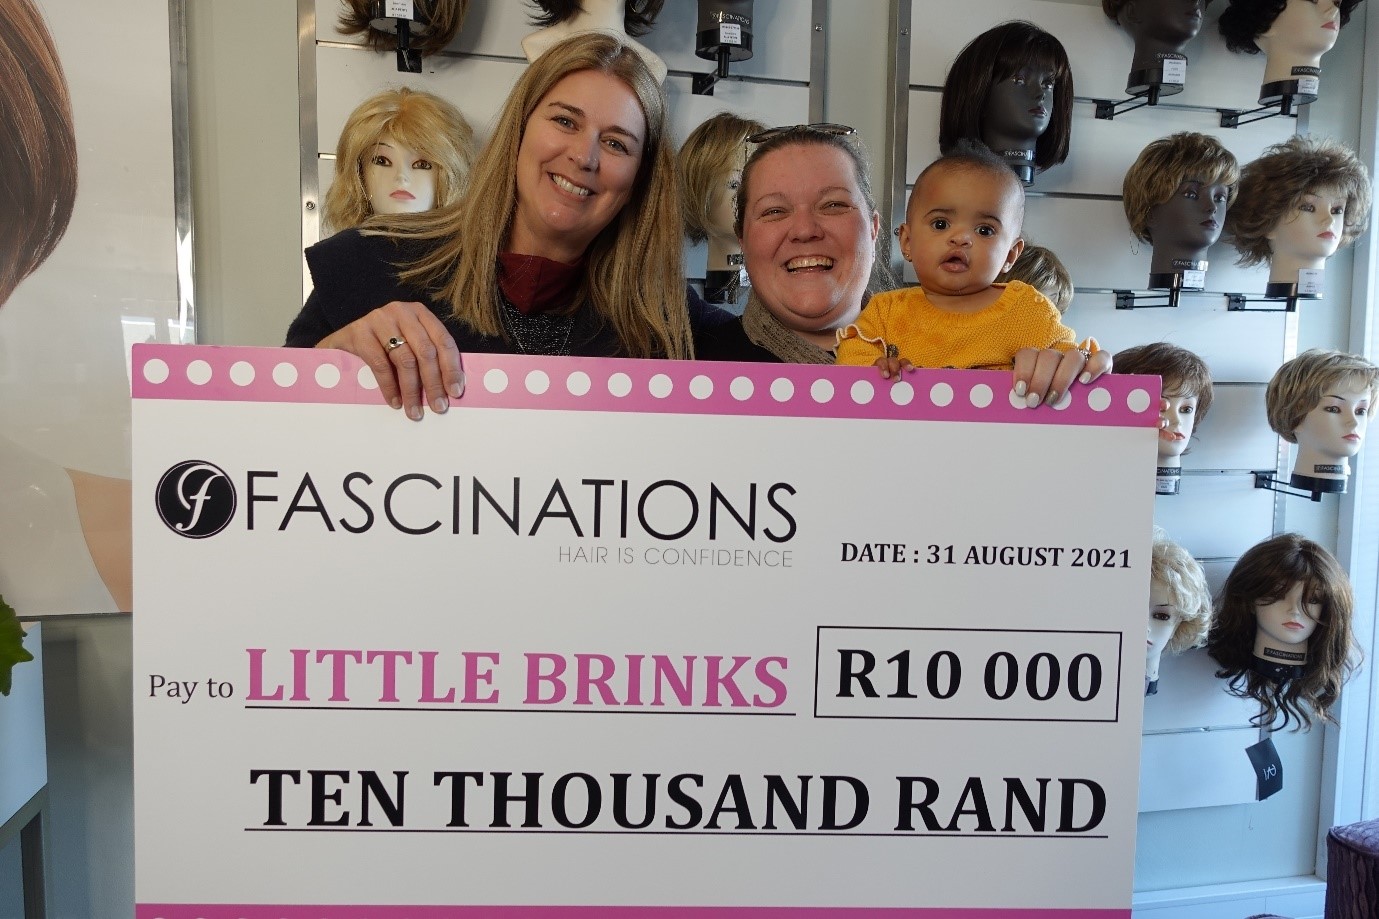 Margaux Randal and Fascinations hair raising money for the Little Brinks Women’s Month Charity Drive